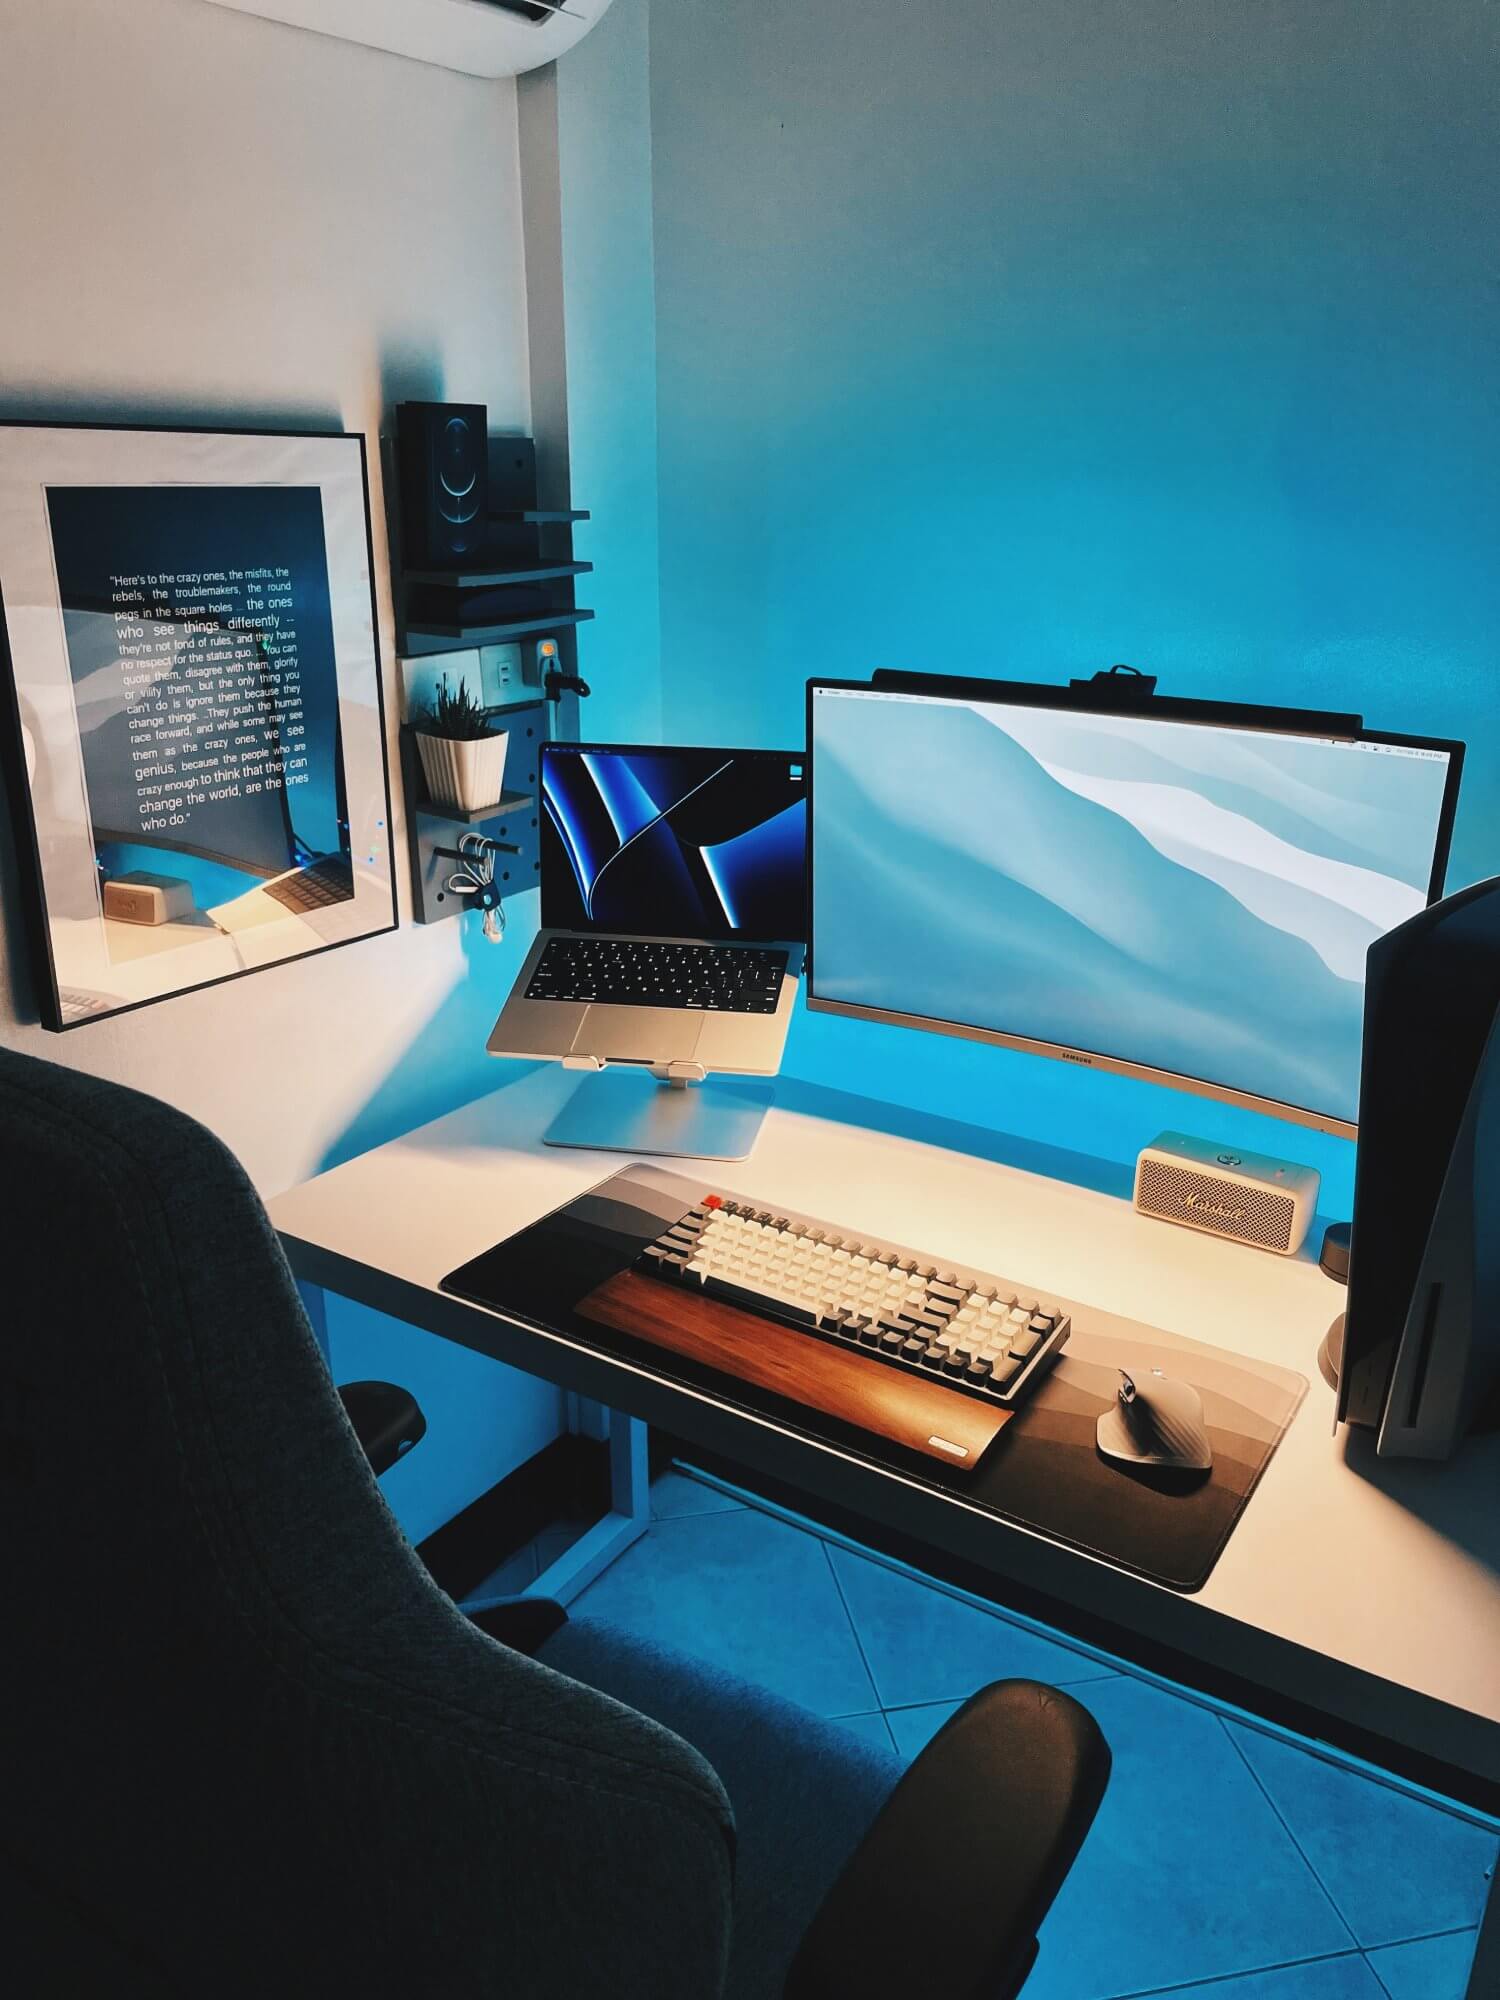 To make her workspace brighter and more ambient, Maru added a LED strip light